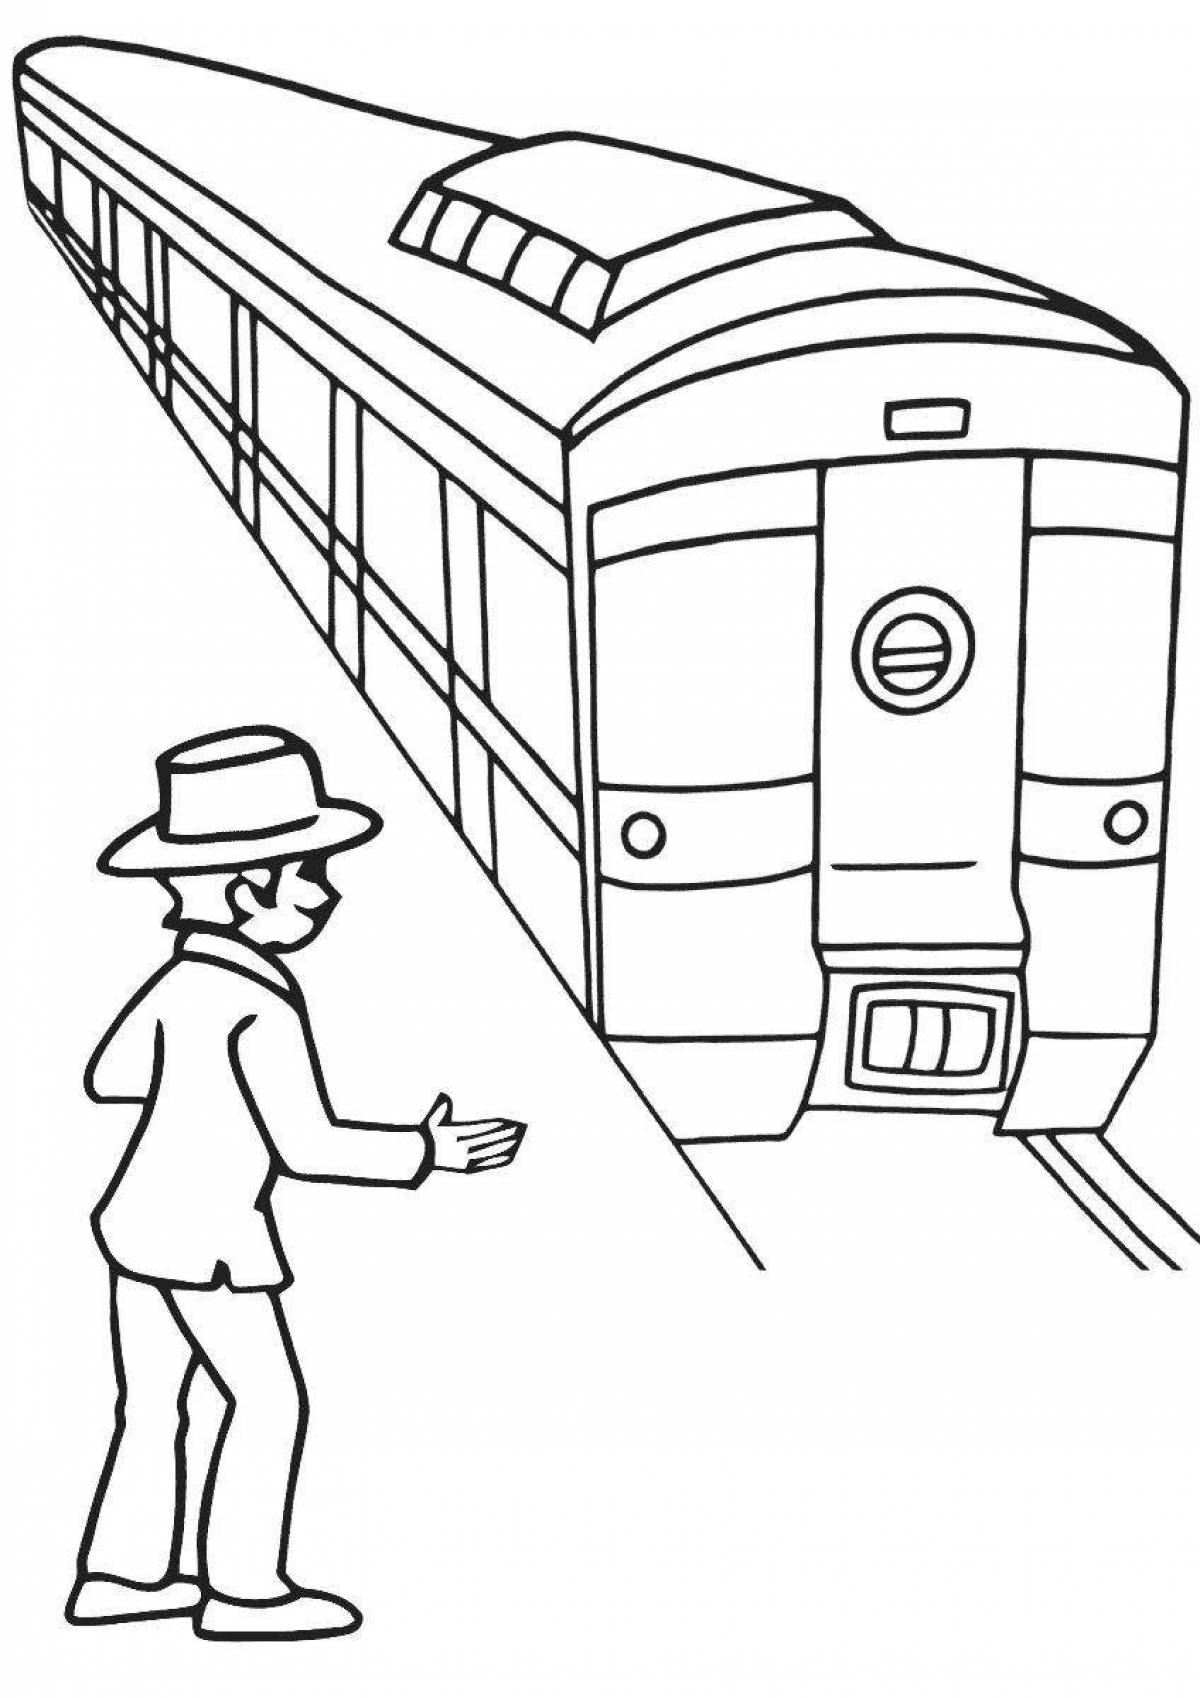 Coloring book amazing Moscow metro train